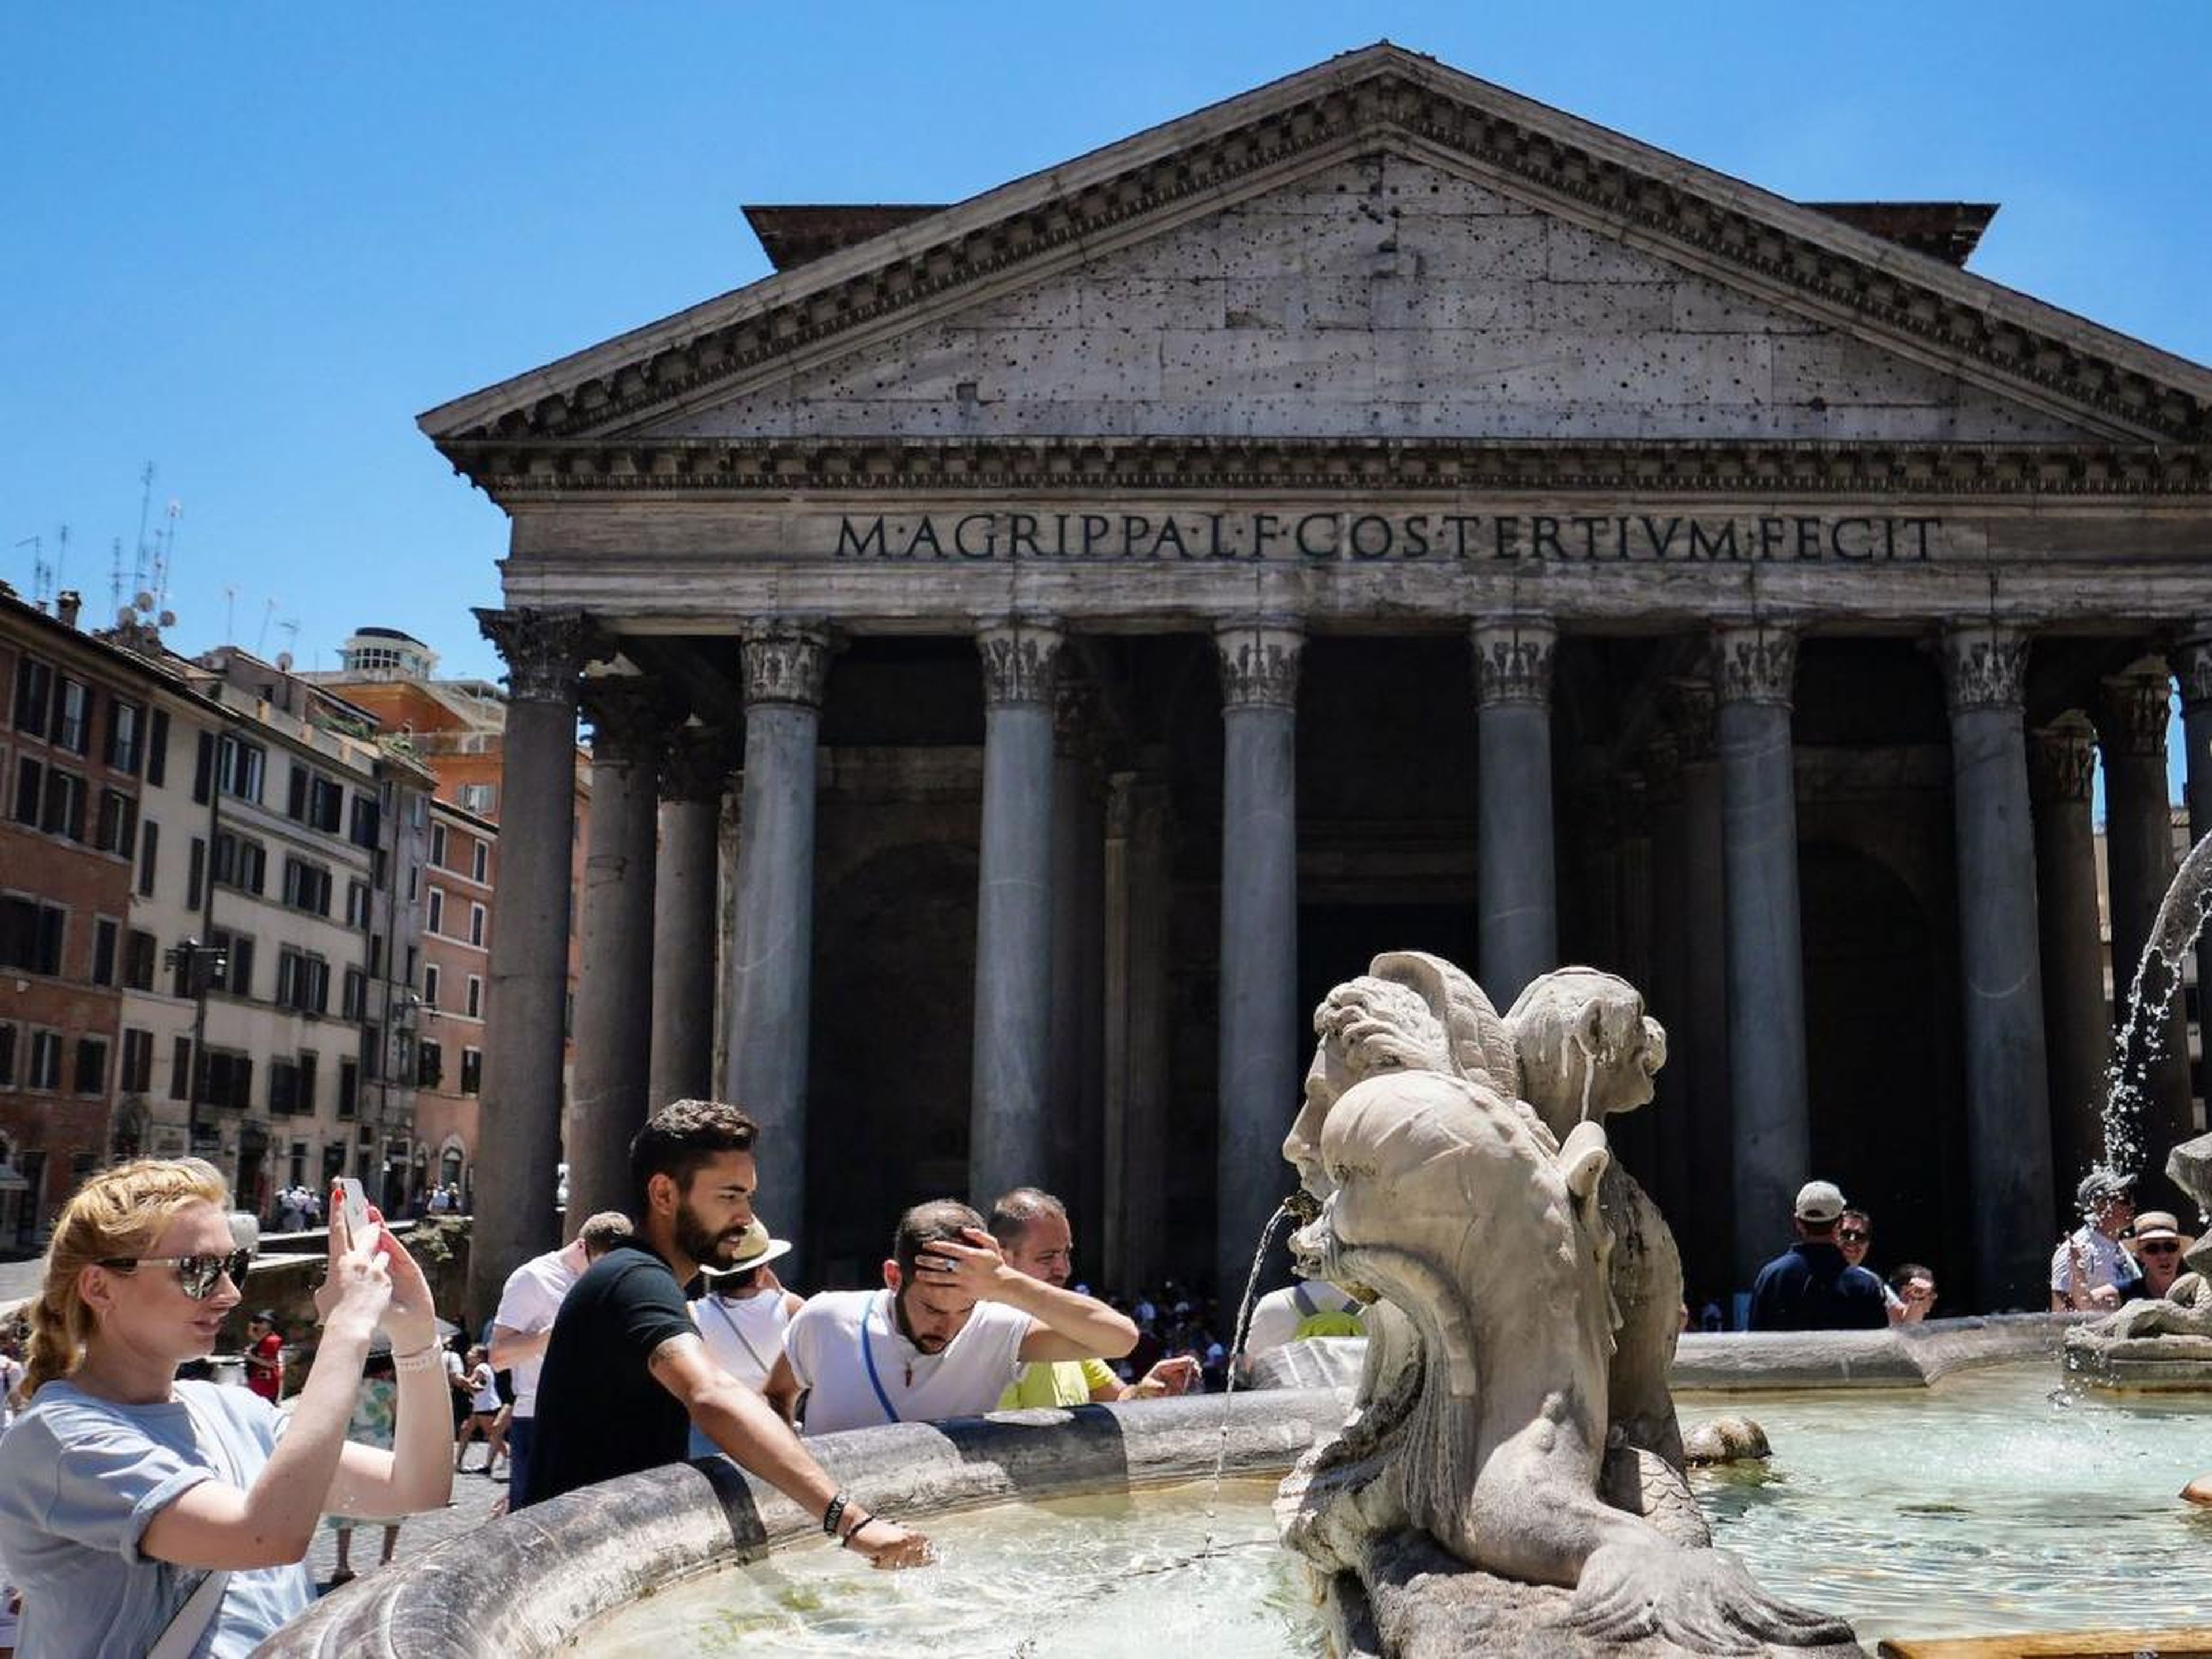 Tourists at a fountain in front of the Pantheon monument.